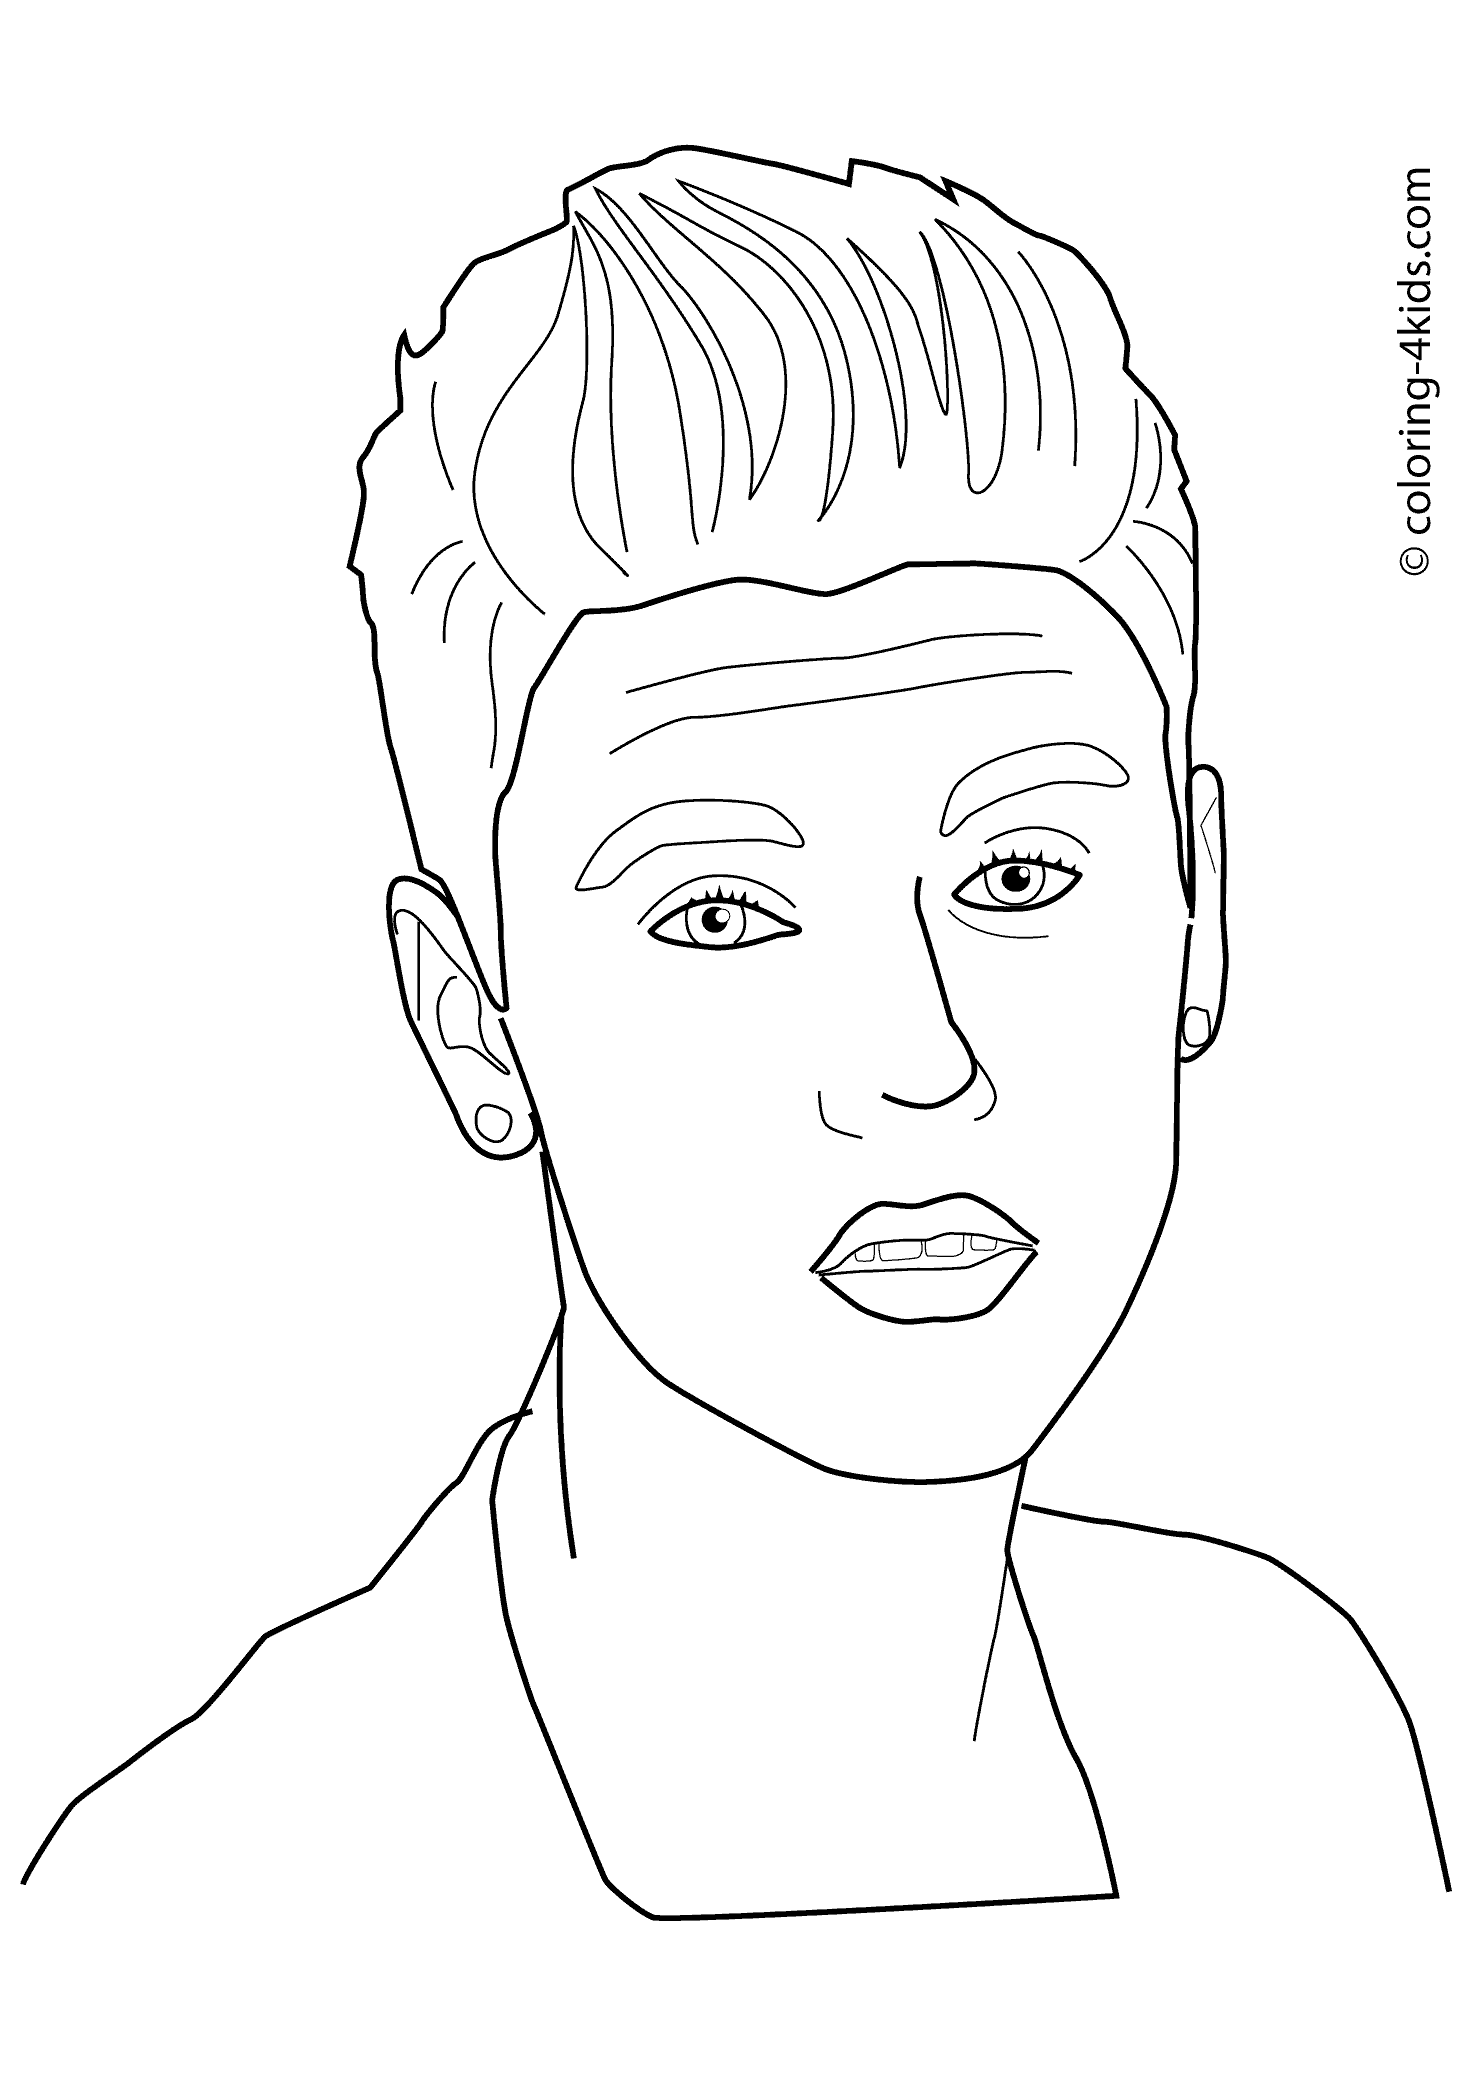 Justin Bieber Coloring Pages For Kids Printable Free Coloring Books Coloring Pages Co